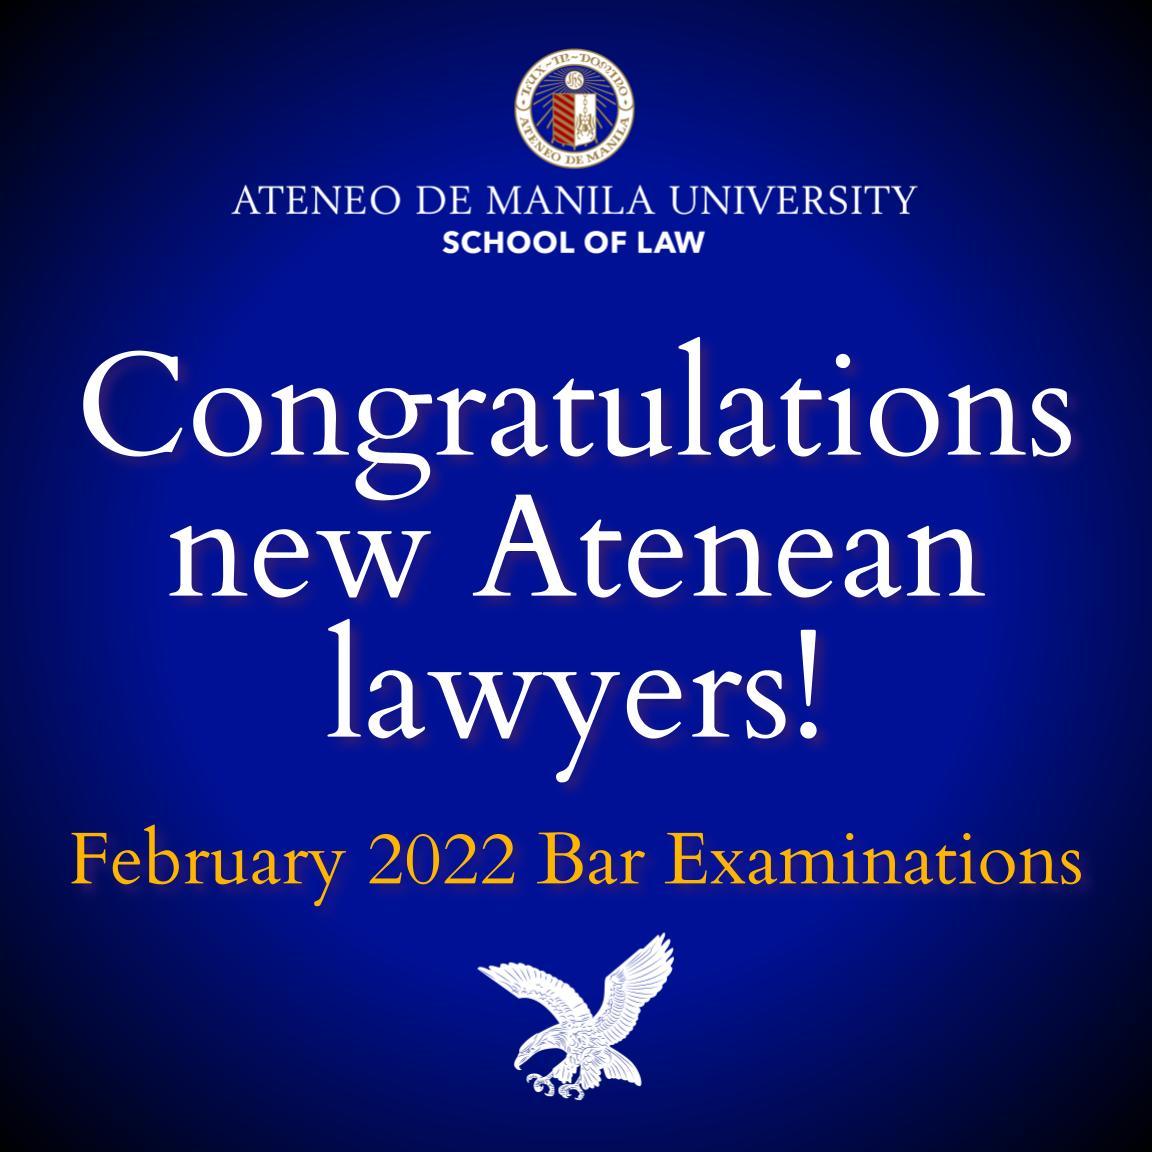 New Atenean lawyers